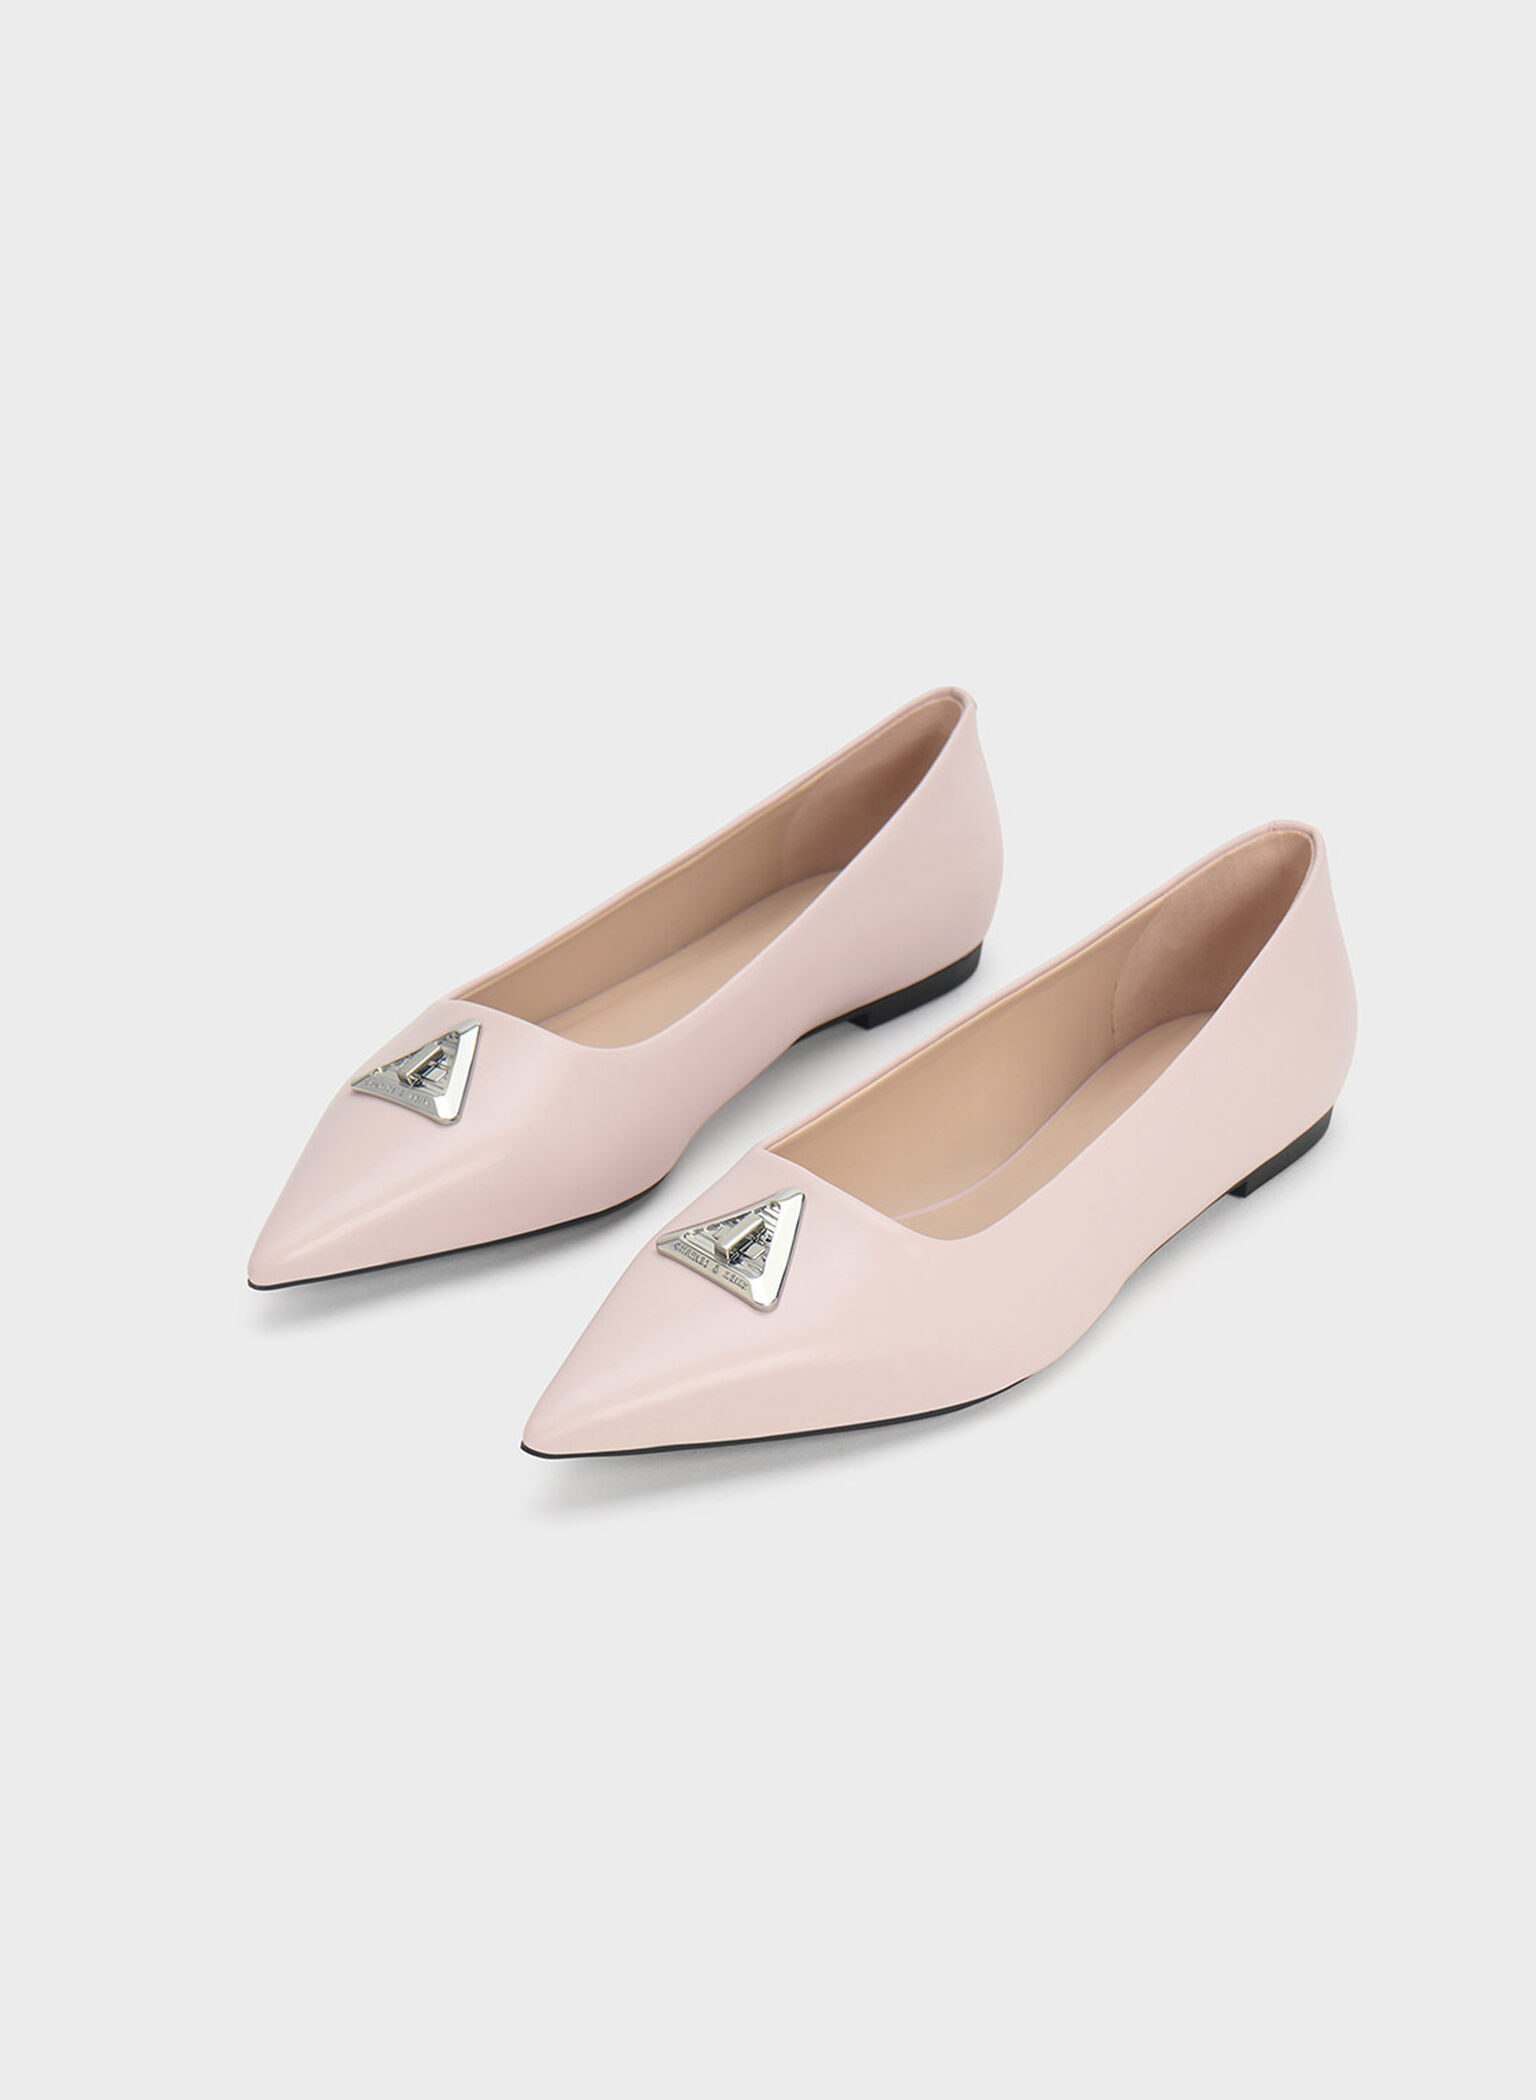 Trice Metallic Accent Pointed-Toe Flats, Nude, hi-res